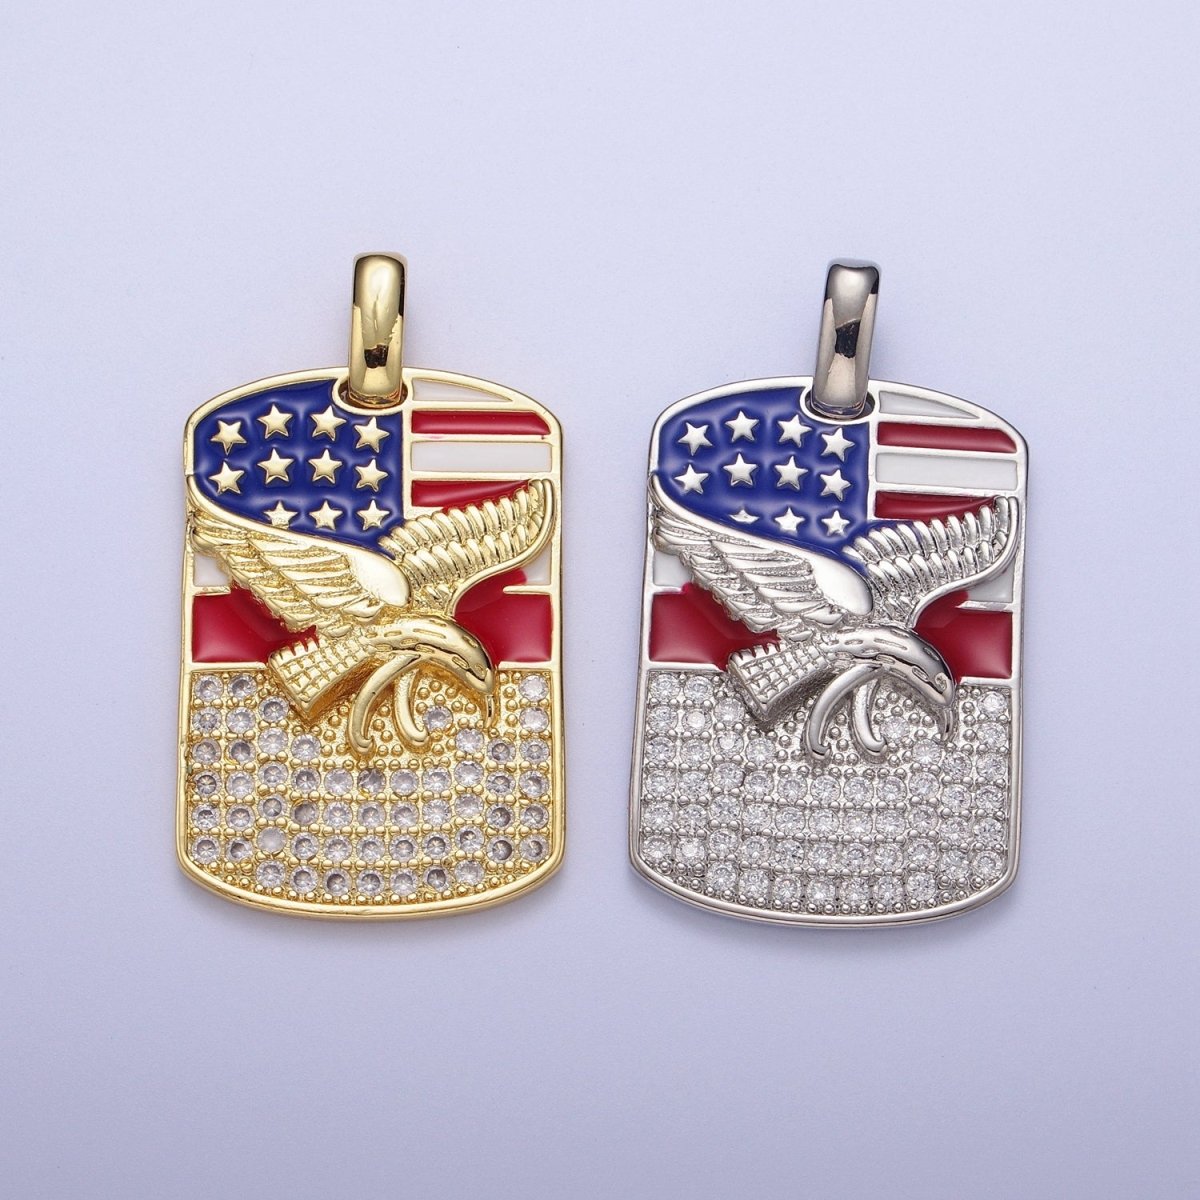 Micro Paved Enamel American Flag Eagle Tag Pendant in Gold & Silver For Jewelry Making H-614 H-677 - DLUXCA